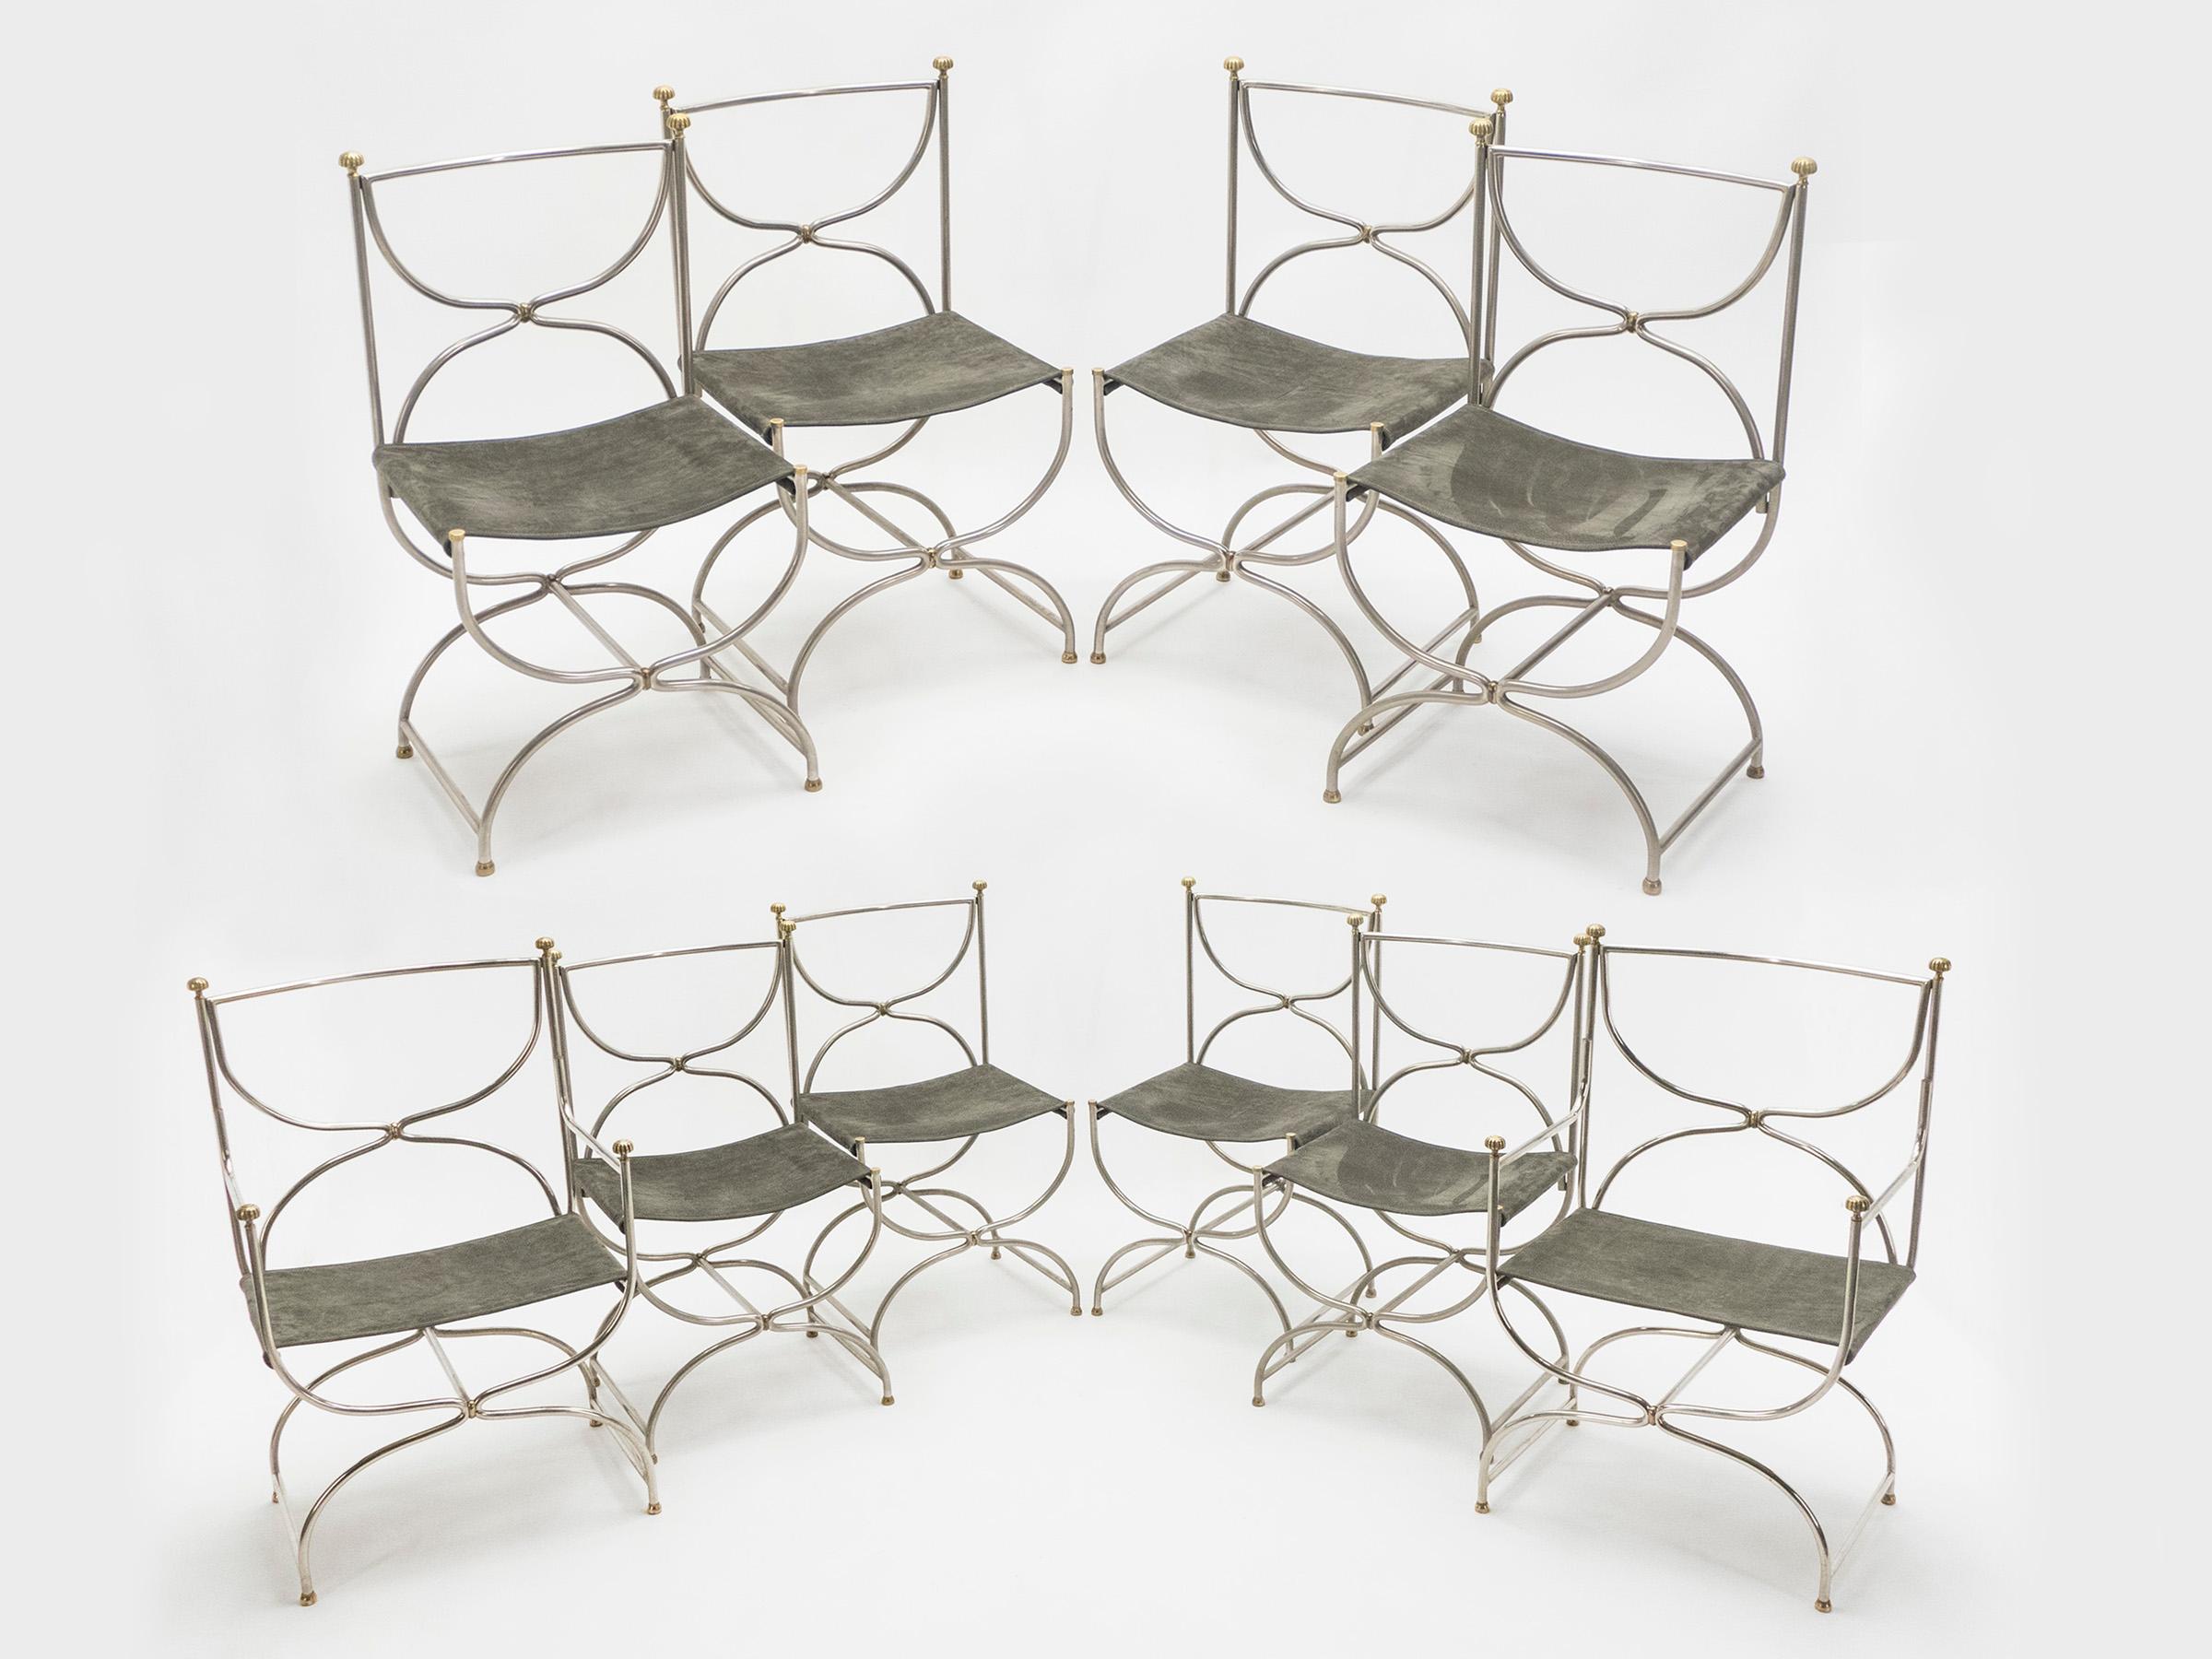 Beautiful set of 1960s Curule Savonarola chairs made of heavy stainless steel metal with brass accents. This incredible set of eight chairs plus two chairs with armrests was created by French interior design firm Maison Jansen. The sparse original